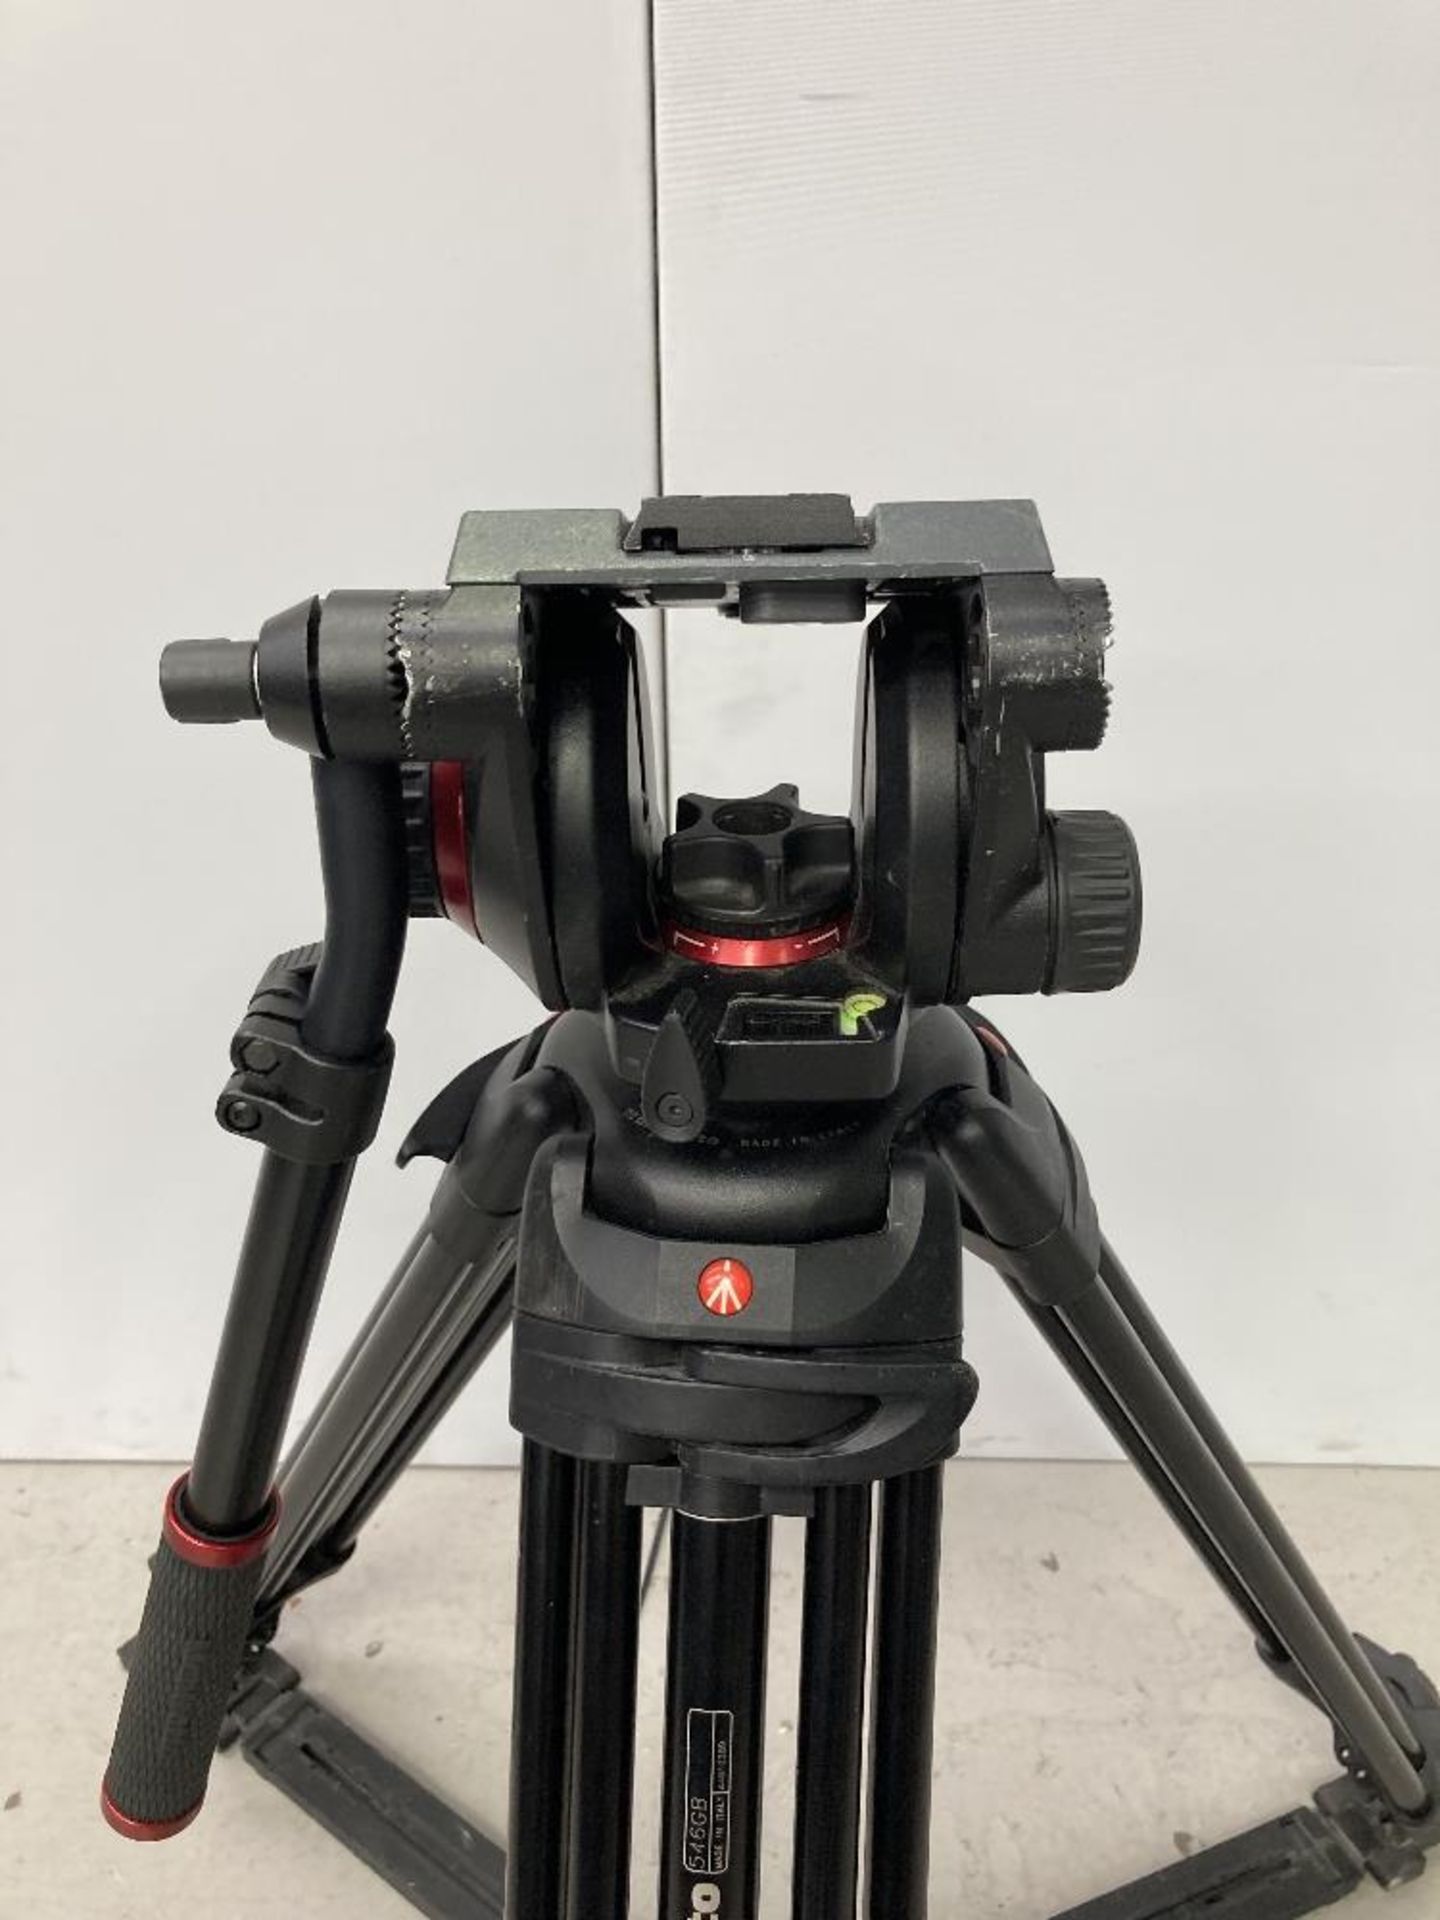 Manfrotto 504HD Tripod Head and 546GB Tripod with Carbon Fibre Legs - Image 6 of 7